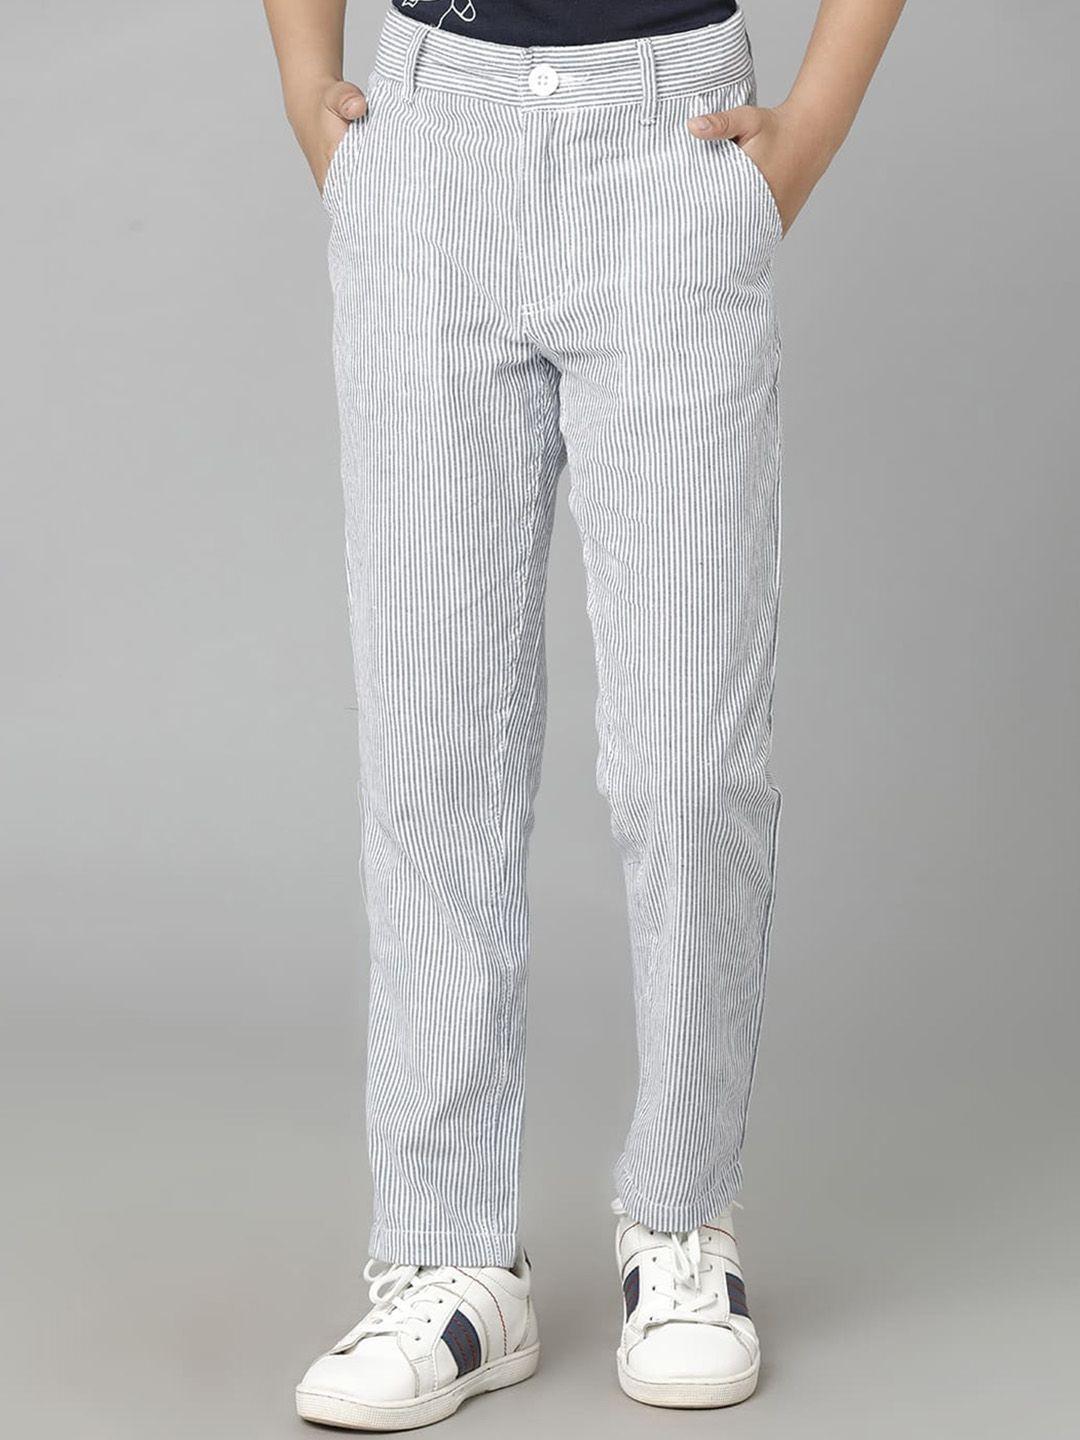 under-fourteen-only-boys-cotton-striped-trousers